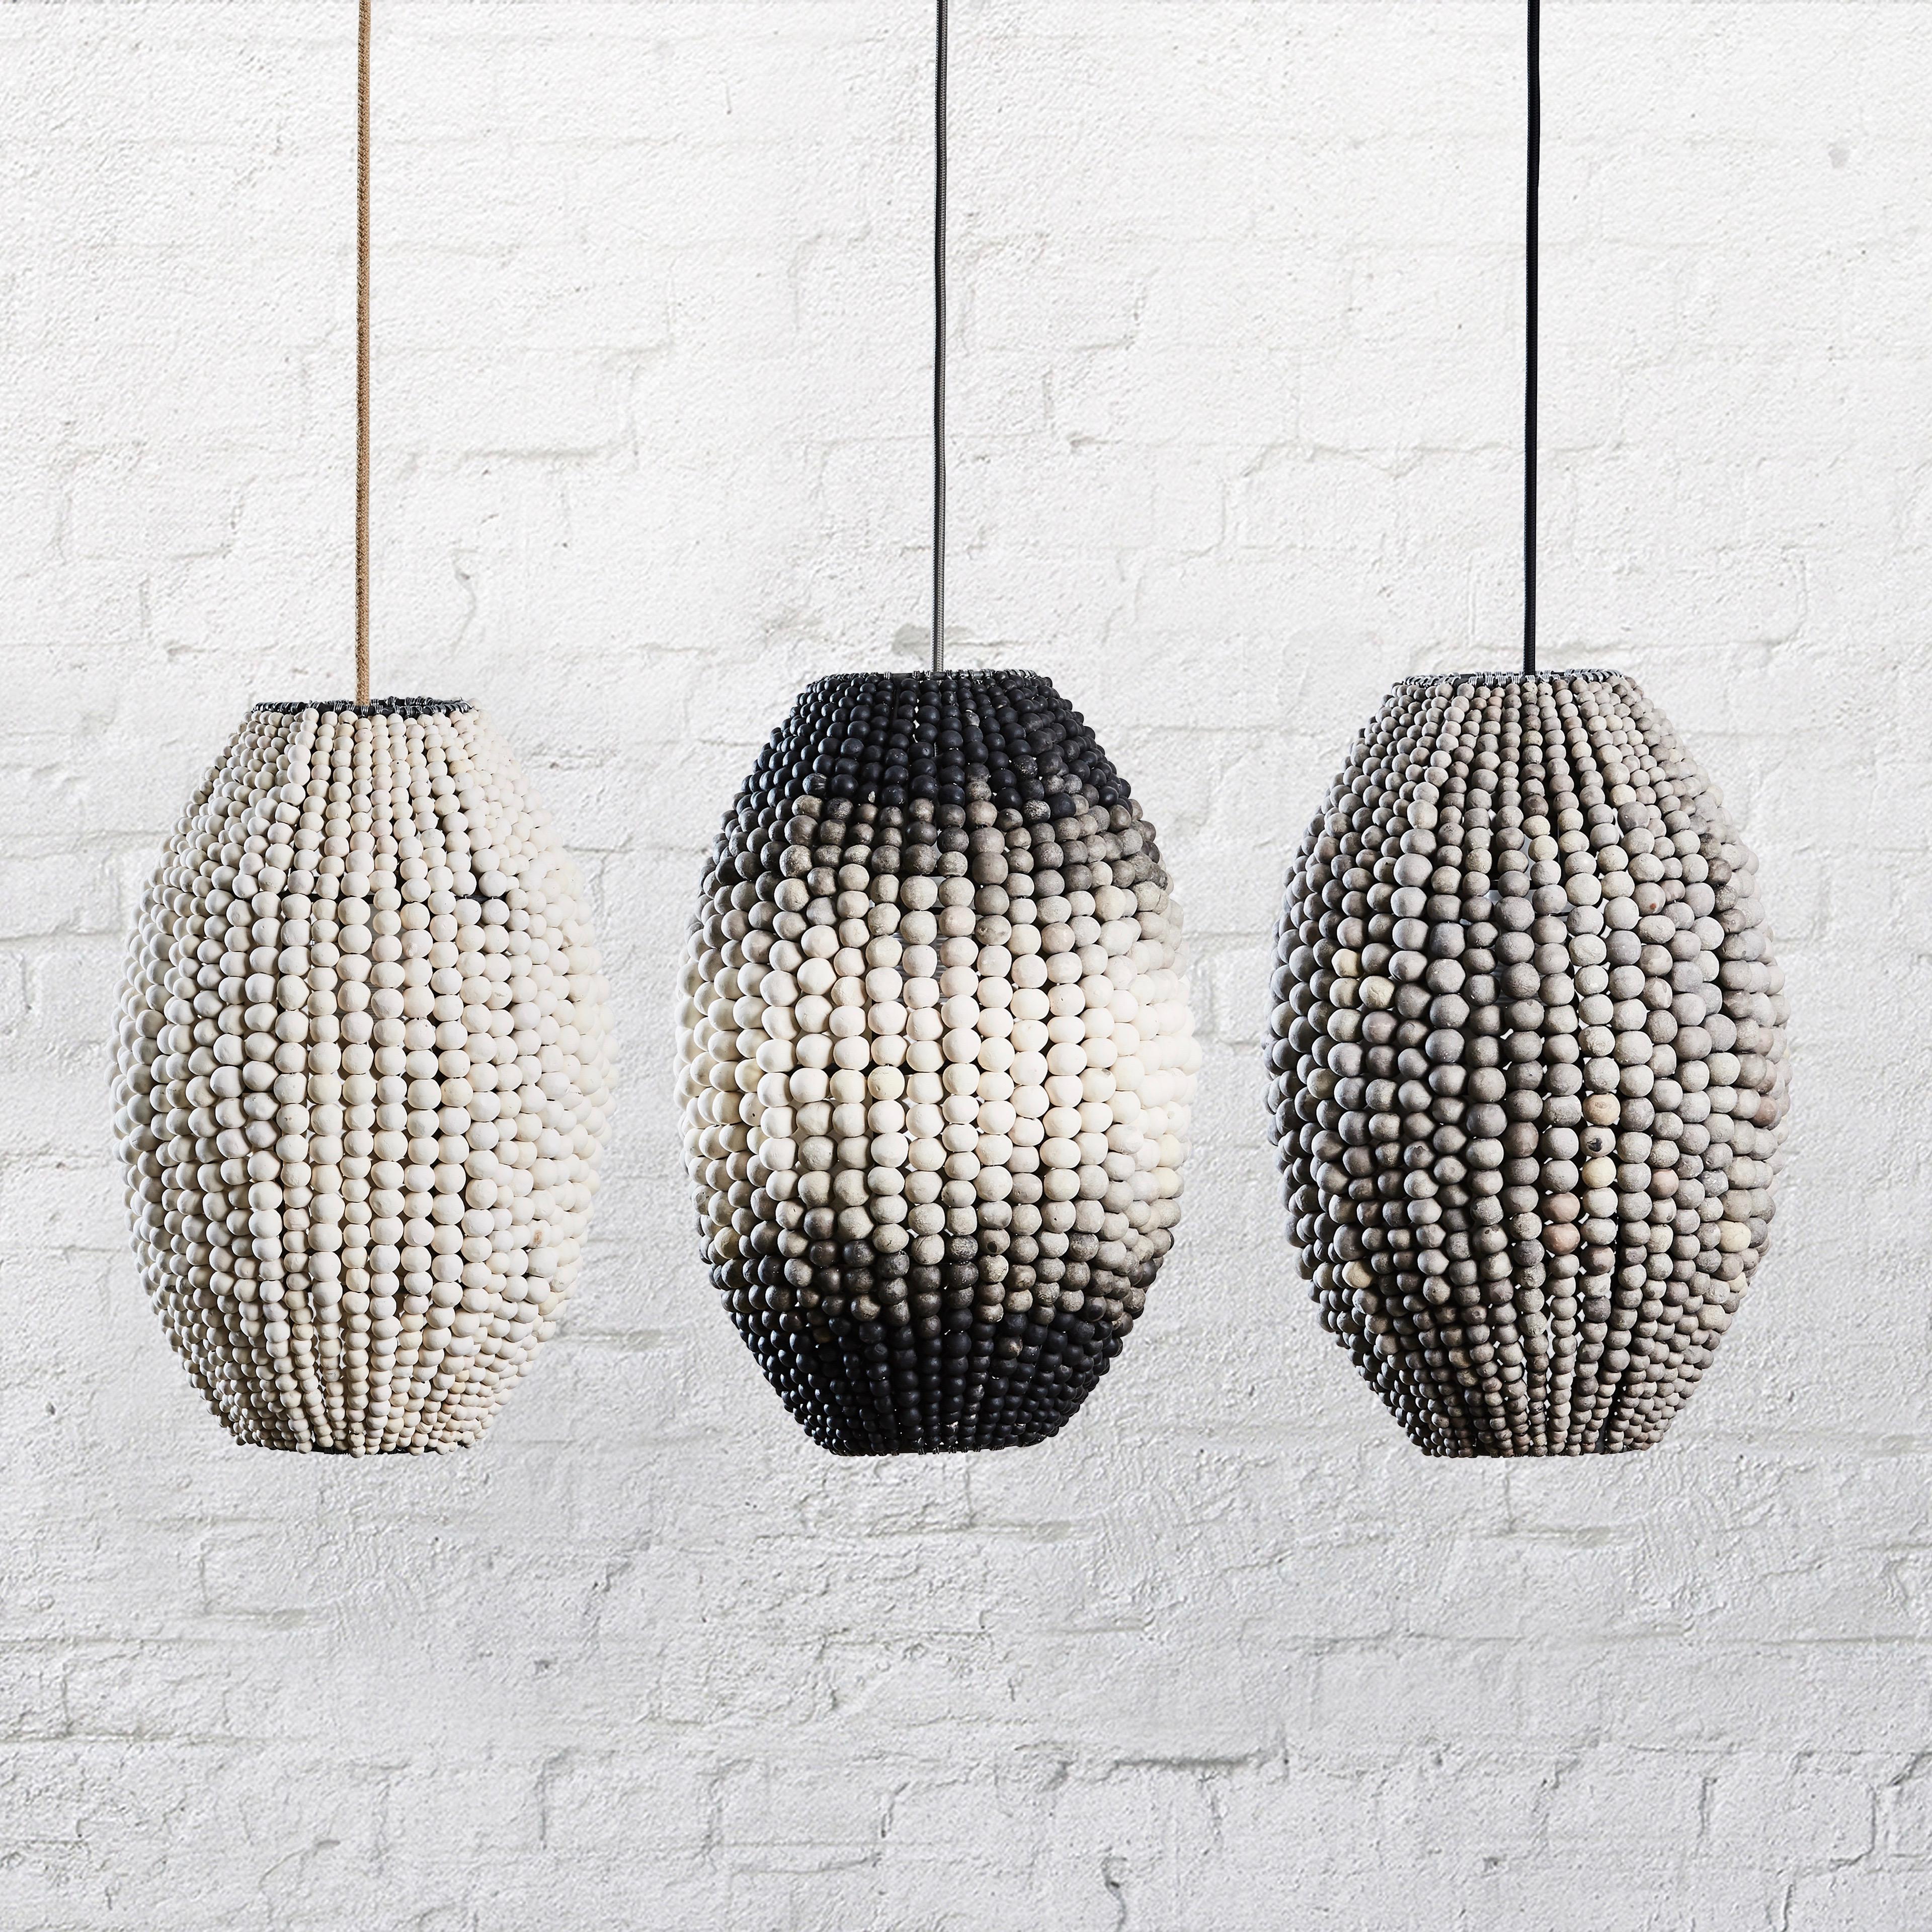 Statement clay beaded lighting, that can be suspended as a single, or in a cluster for maximum impact.

The klaylife Barrel Pendant has been specially created for those who don’t have an enormous space but still want pendant lighting that packs a